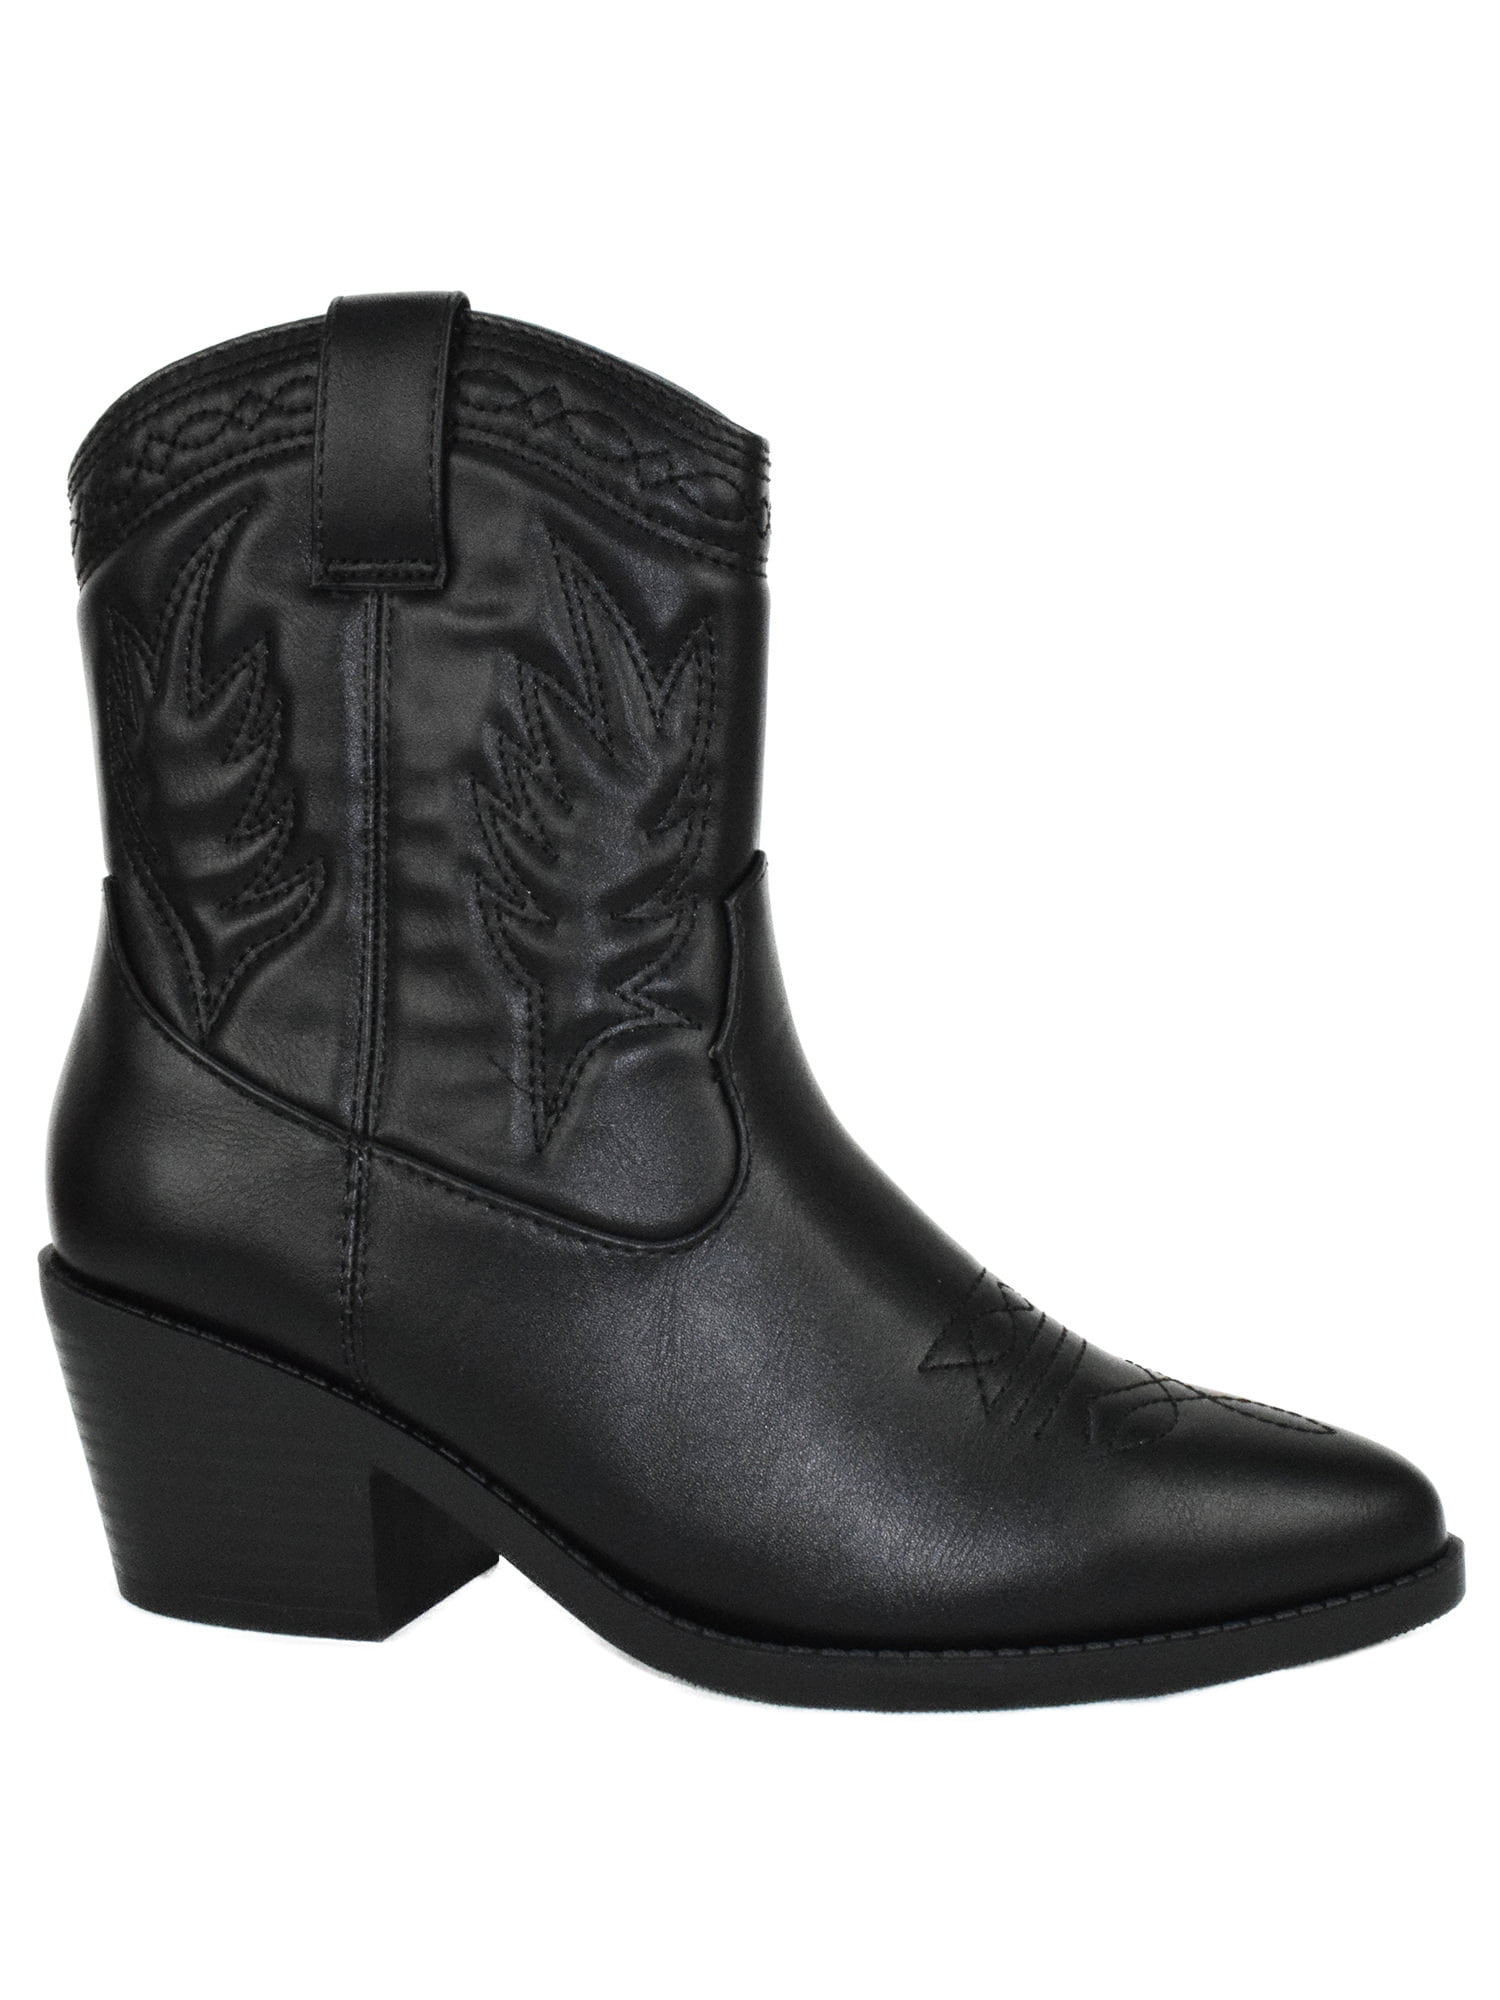 Picotee Black Soda Women Cowgirl Cowboy Western Stitched Ankle Boots ...